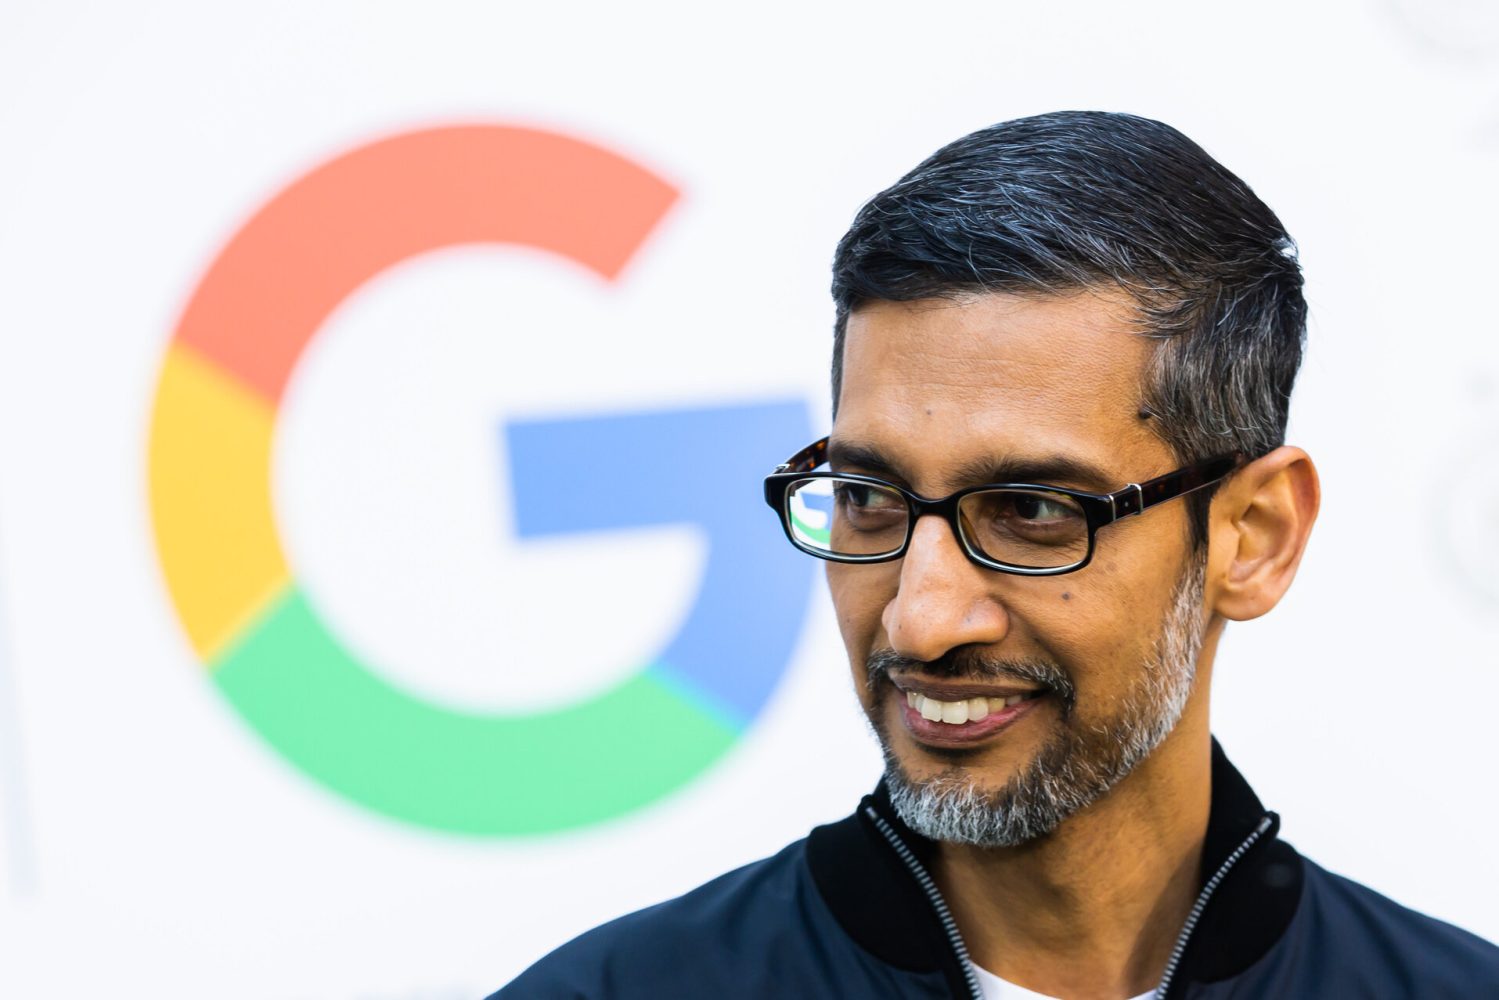 Would you pay to use Google Search? Google thinks you might for the new AI version